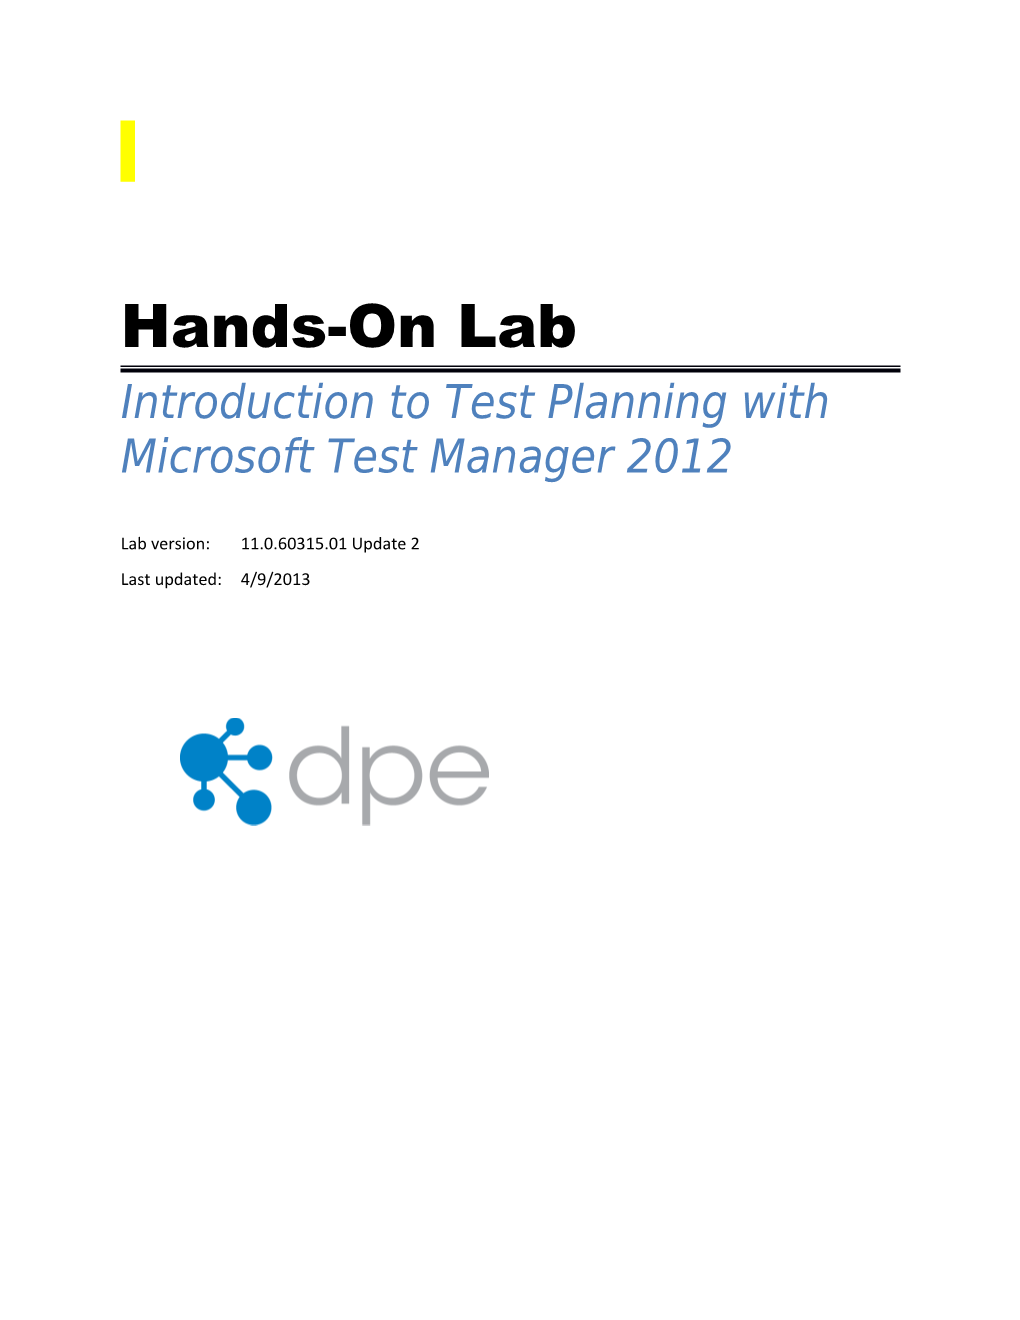 Introduction to Test Planning with Microsoft Test Manager 2012